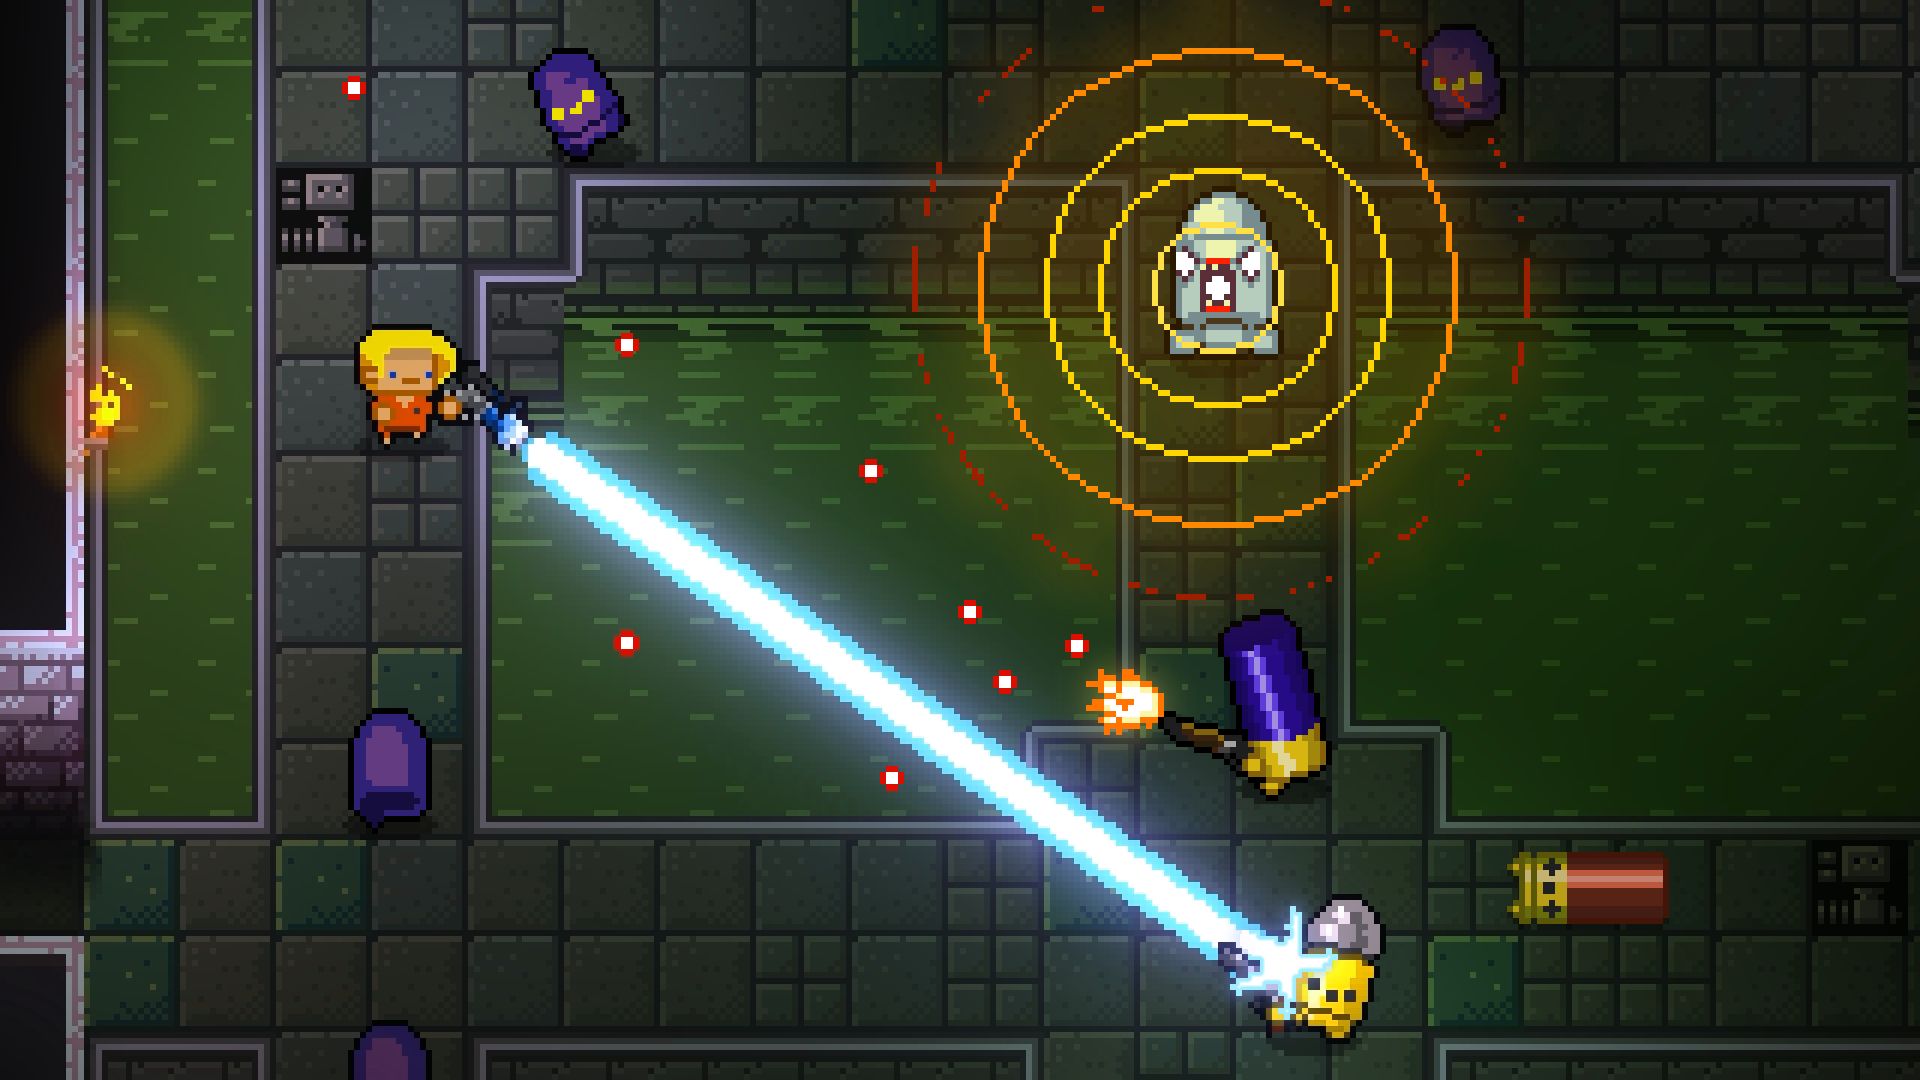  Enter The Gungeon HD Android Wallpapers